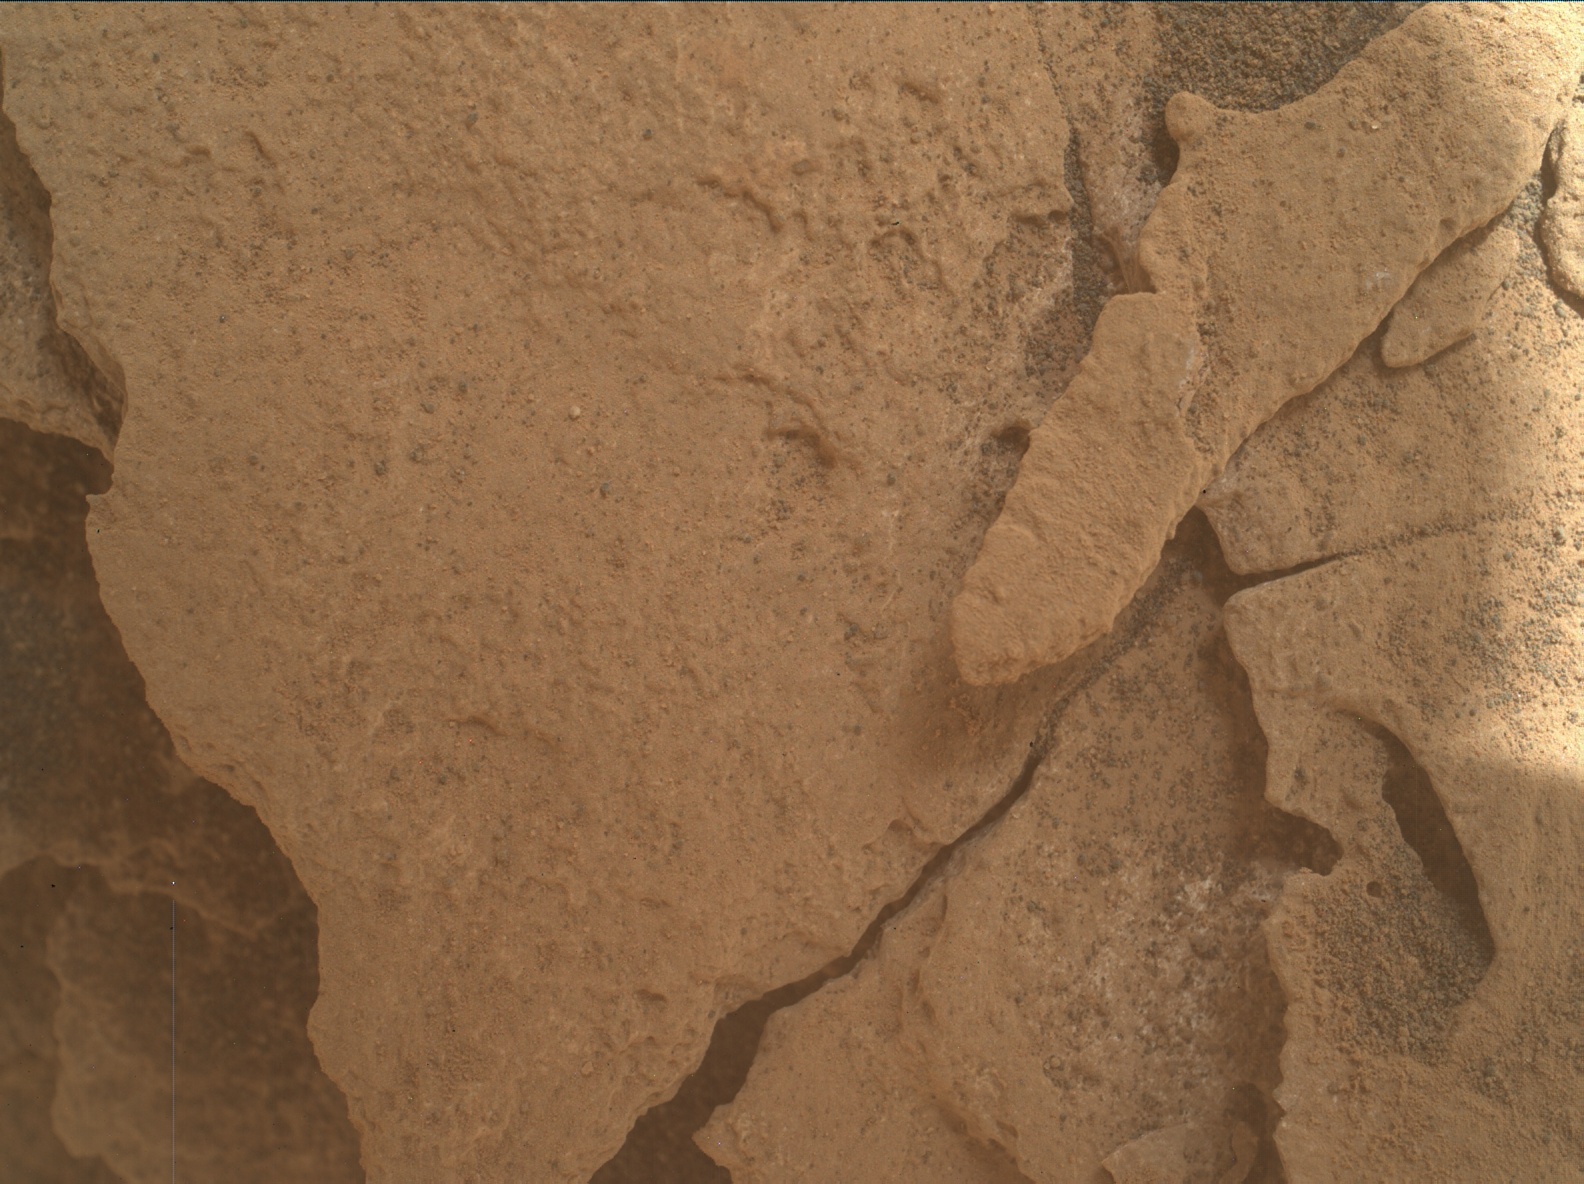 Nasa's Mars rover Curiosity acquired this image using its Mars Hand Lens Imager (MAHLI) on Sol 3278